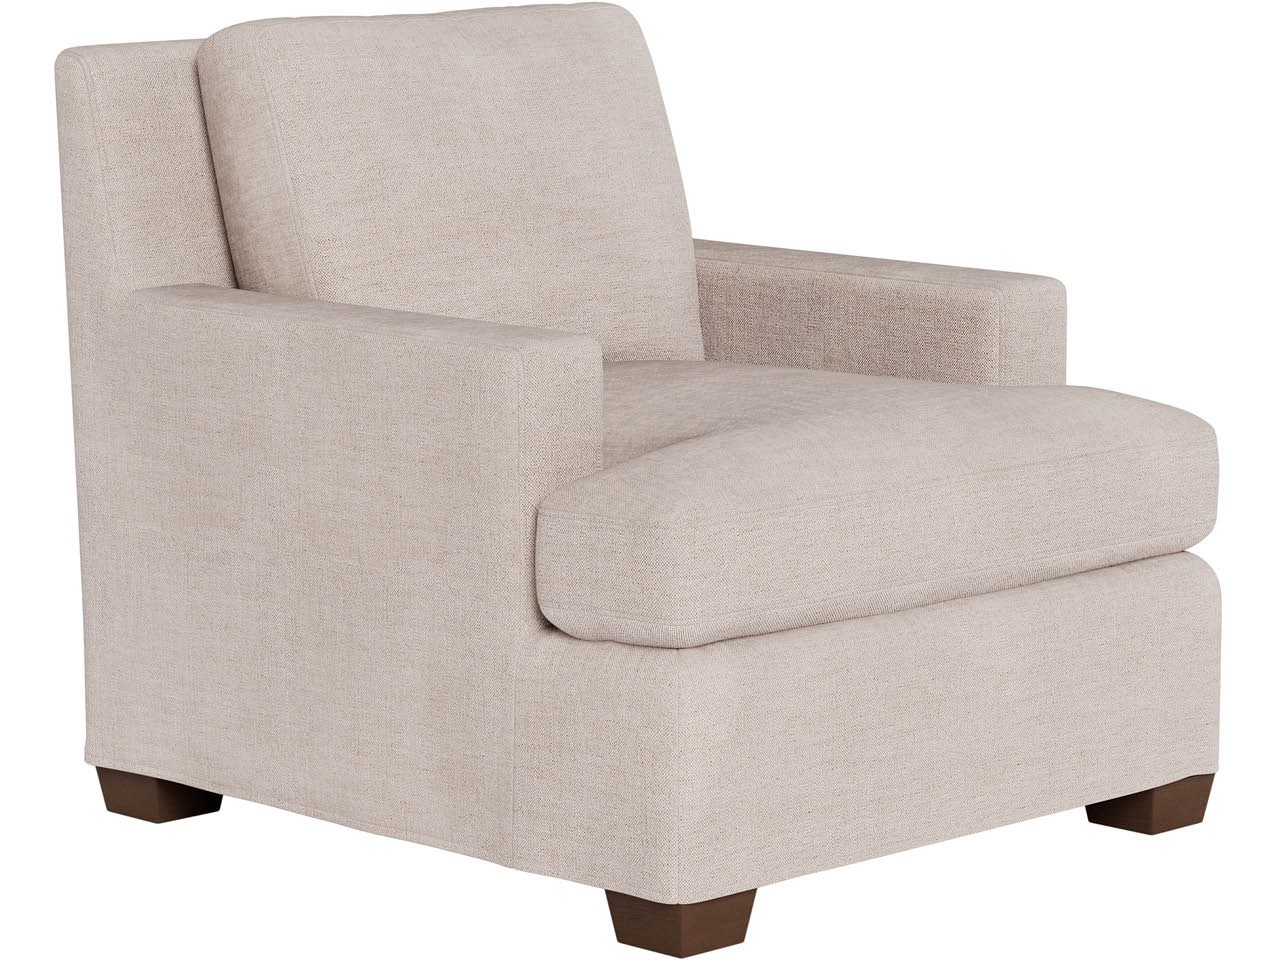 Malibu Slipcover Chair - Special Order